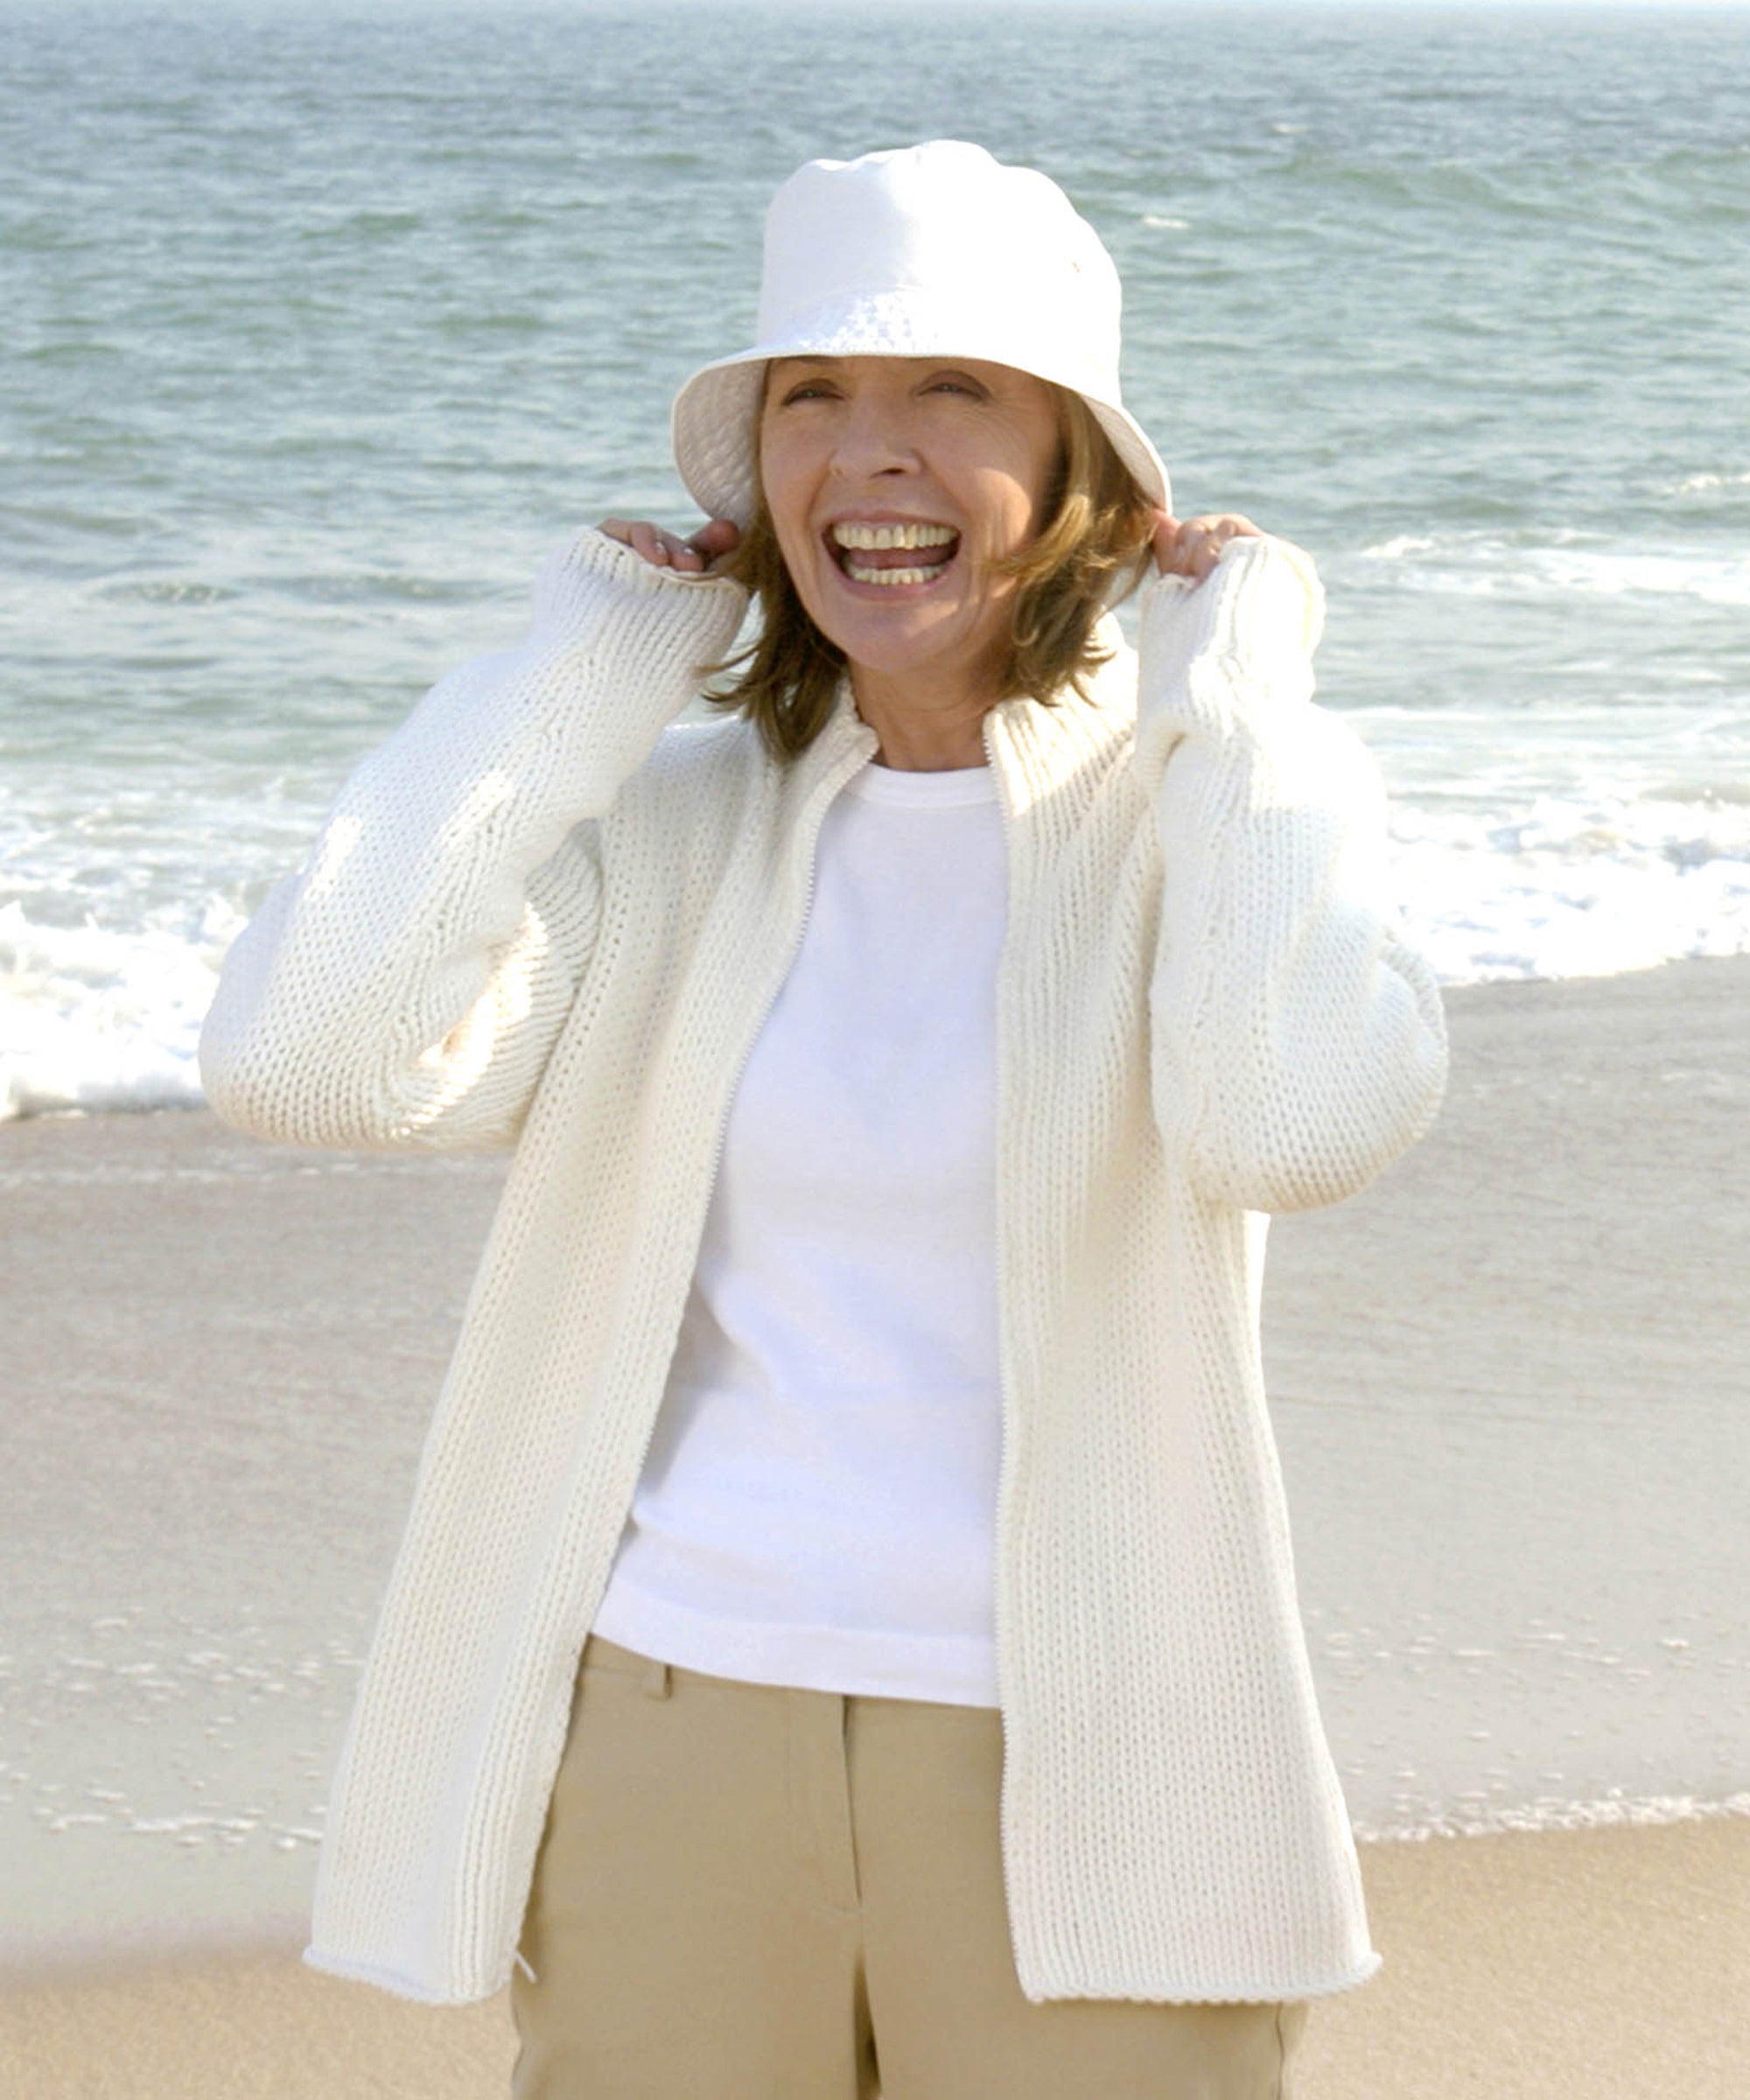 Coastal Grandmother Style: A Complete Guide to the Aesthetic